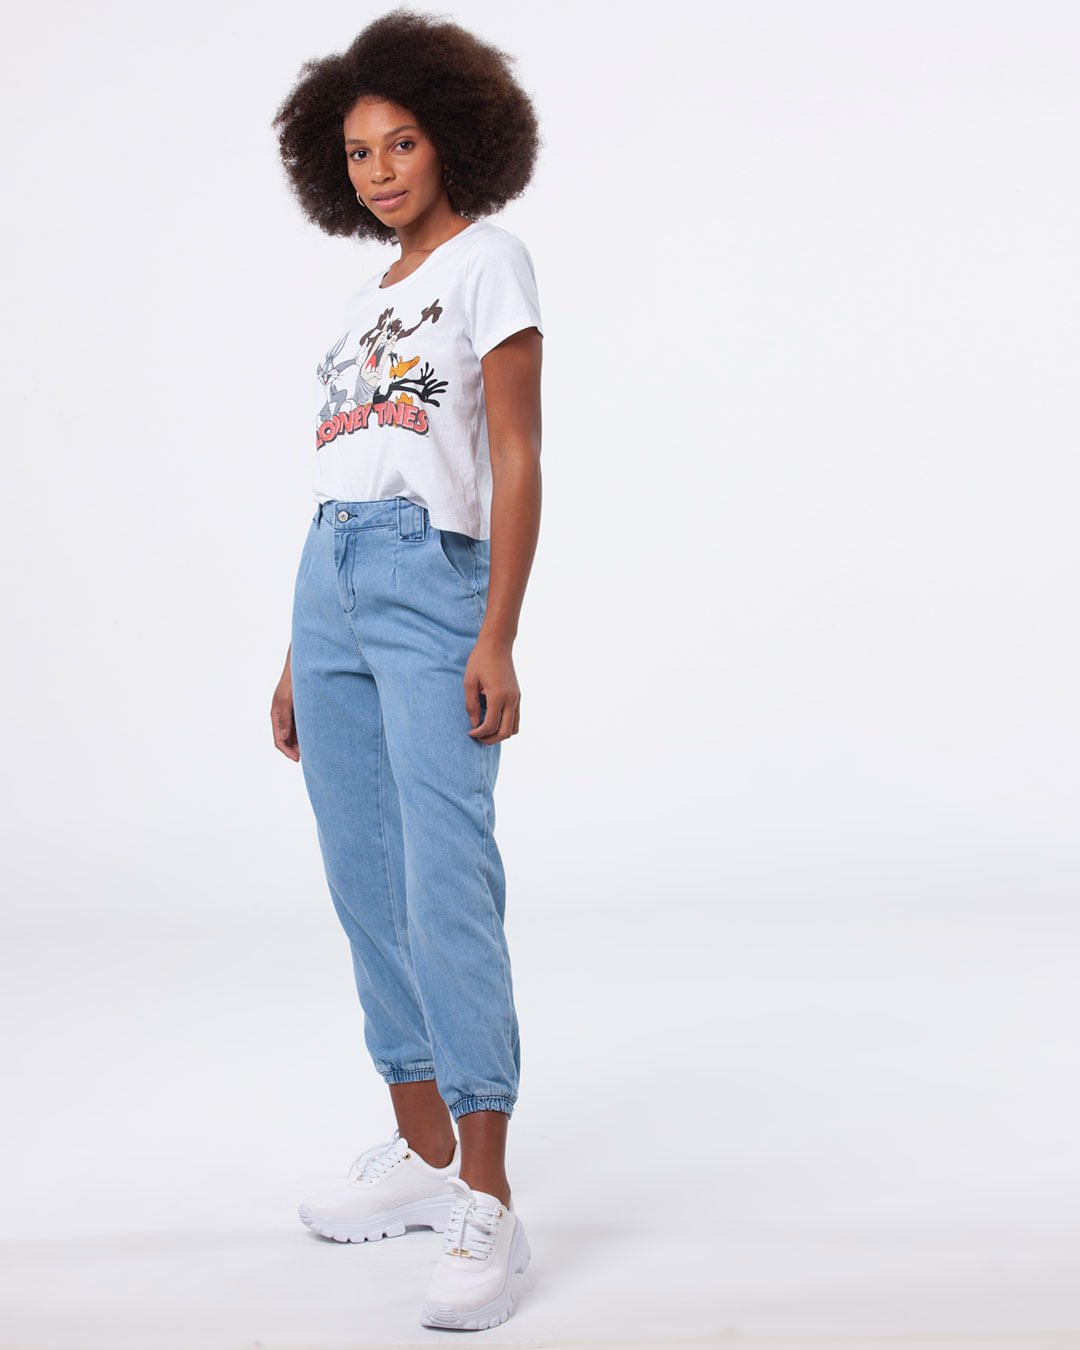 Cropped-22124-Looney---Branco